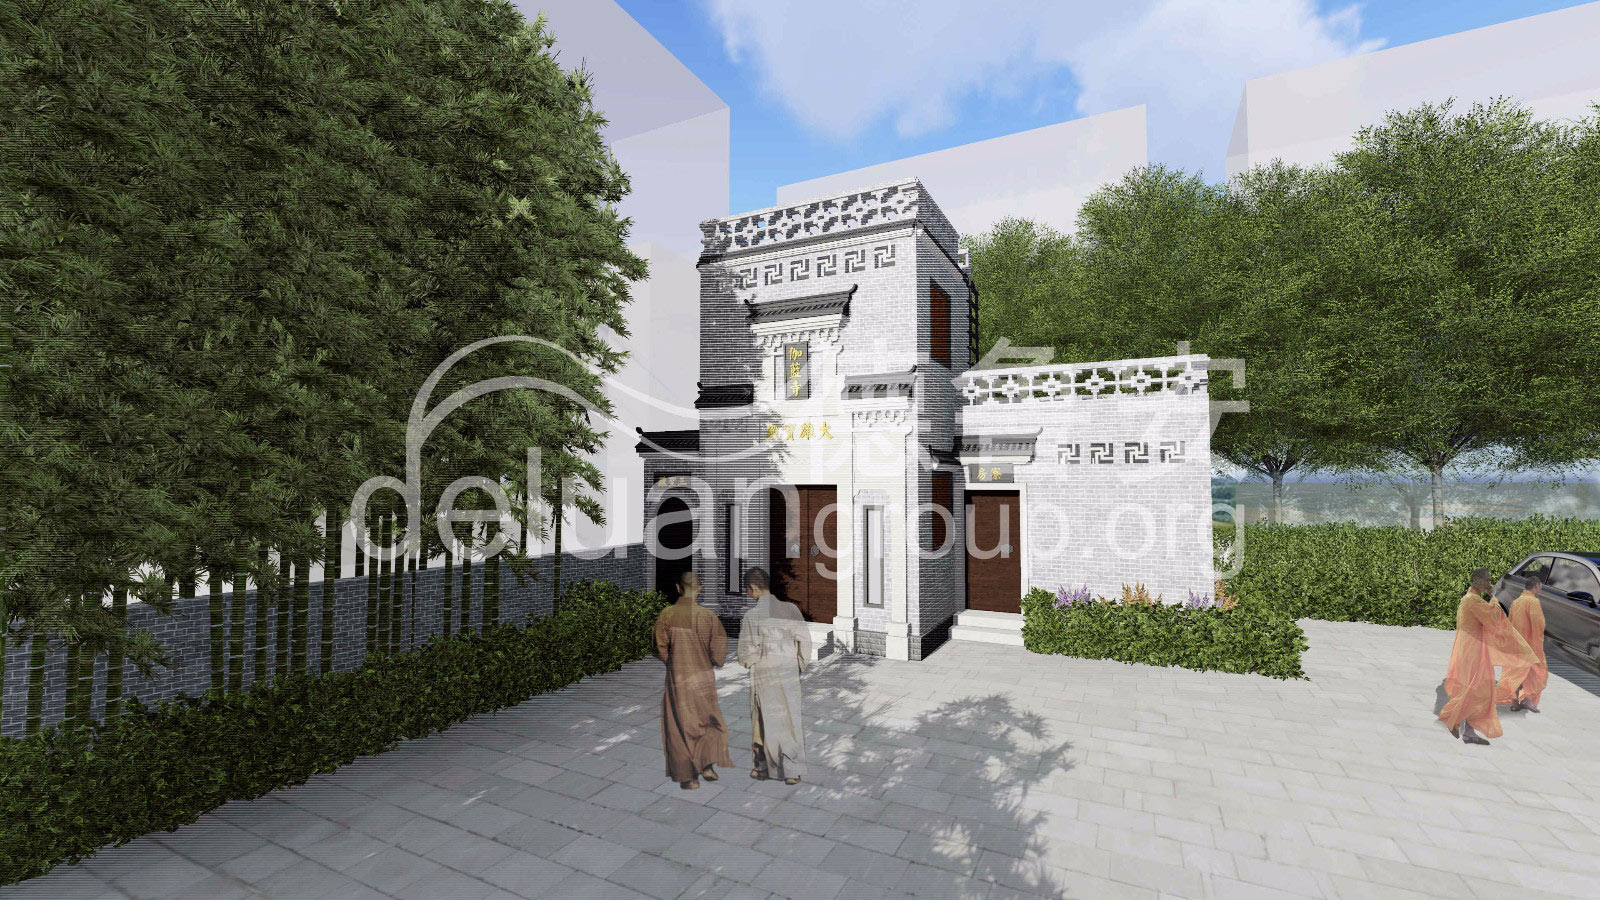 Design of single building of Jialan temple in Wuxue Hubei Province(图9)